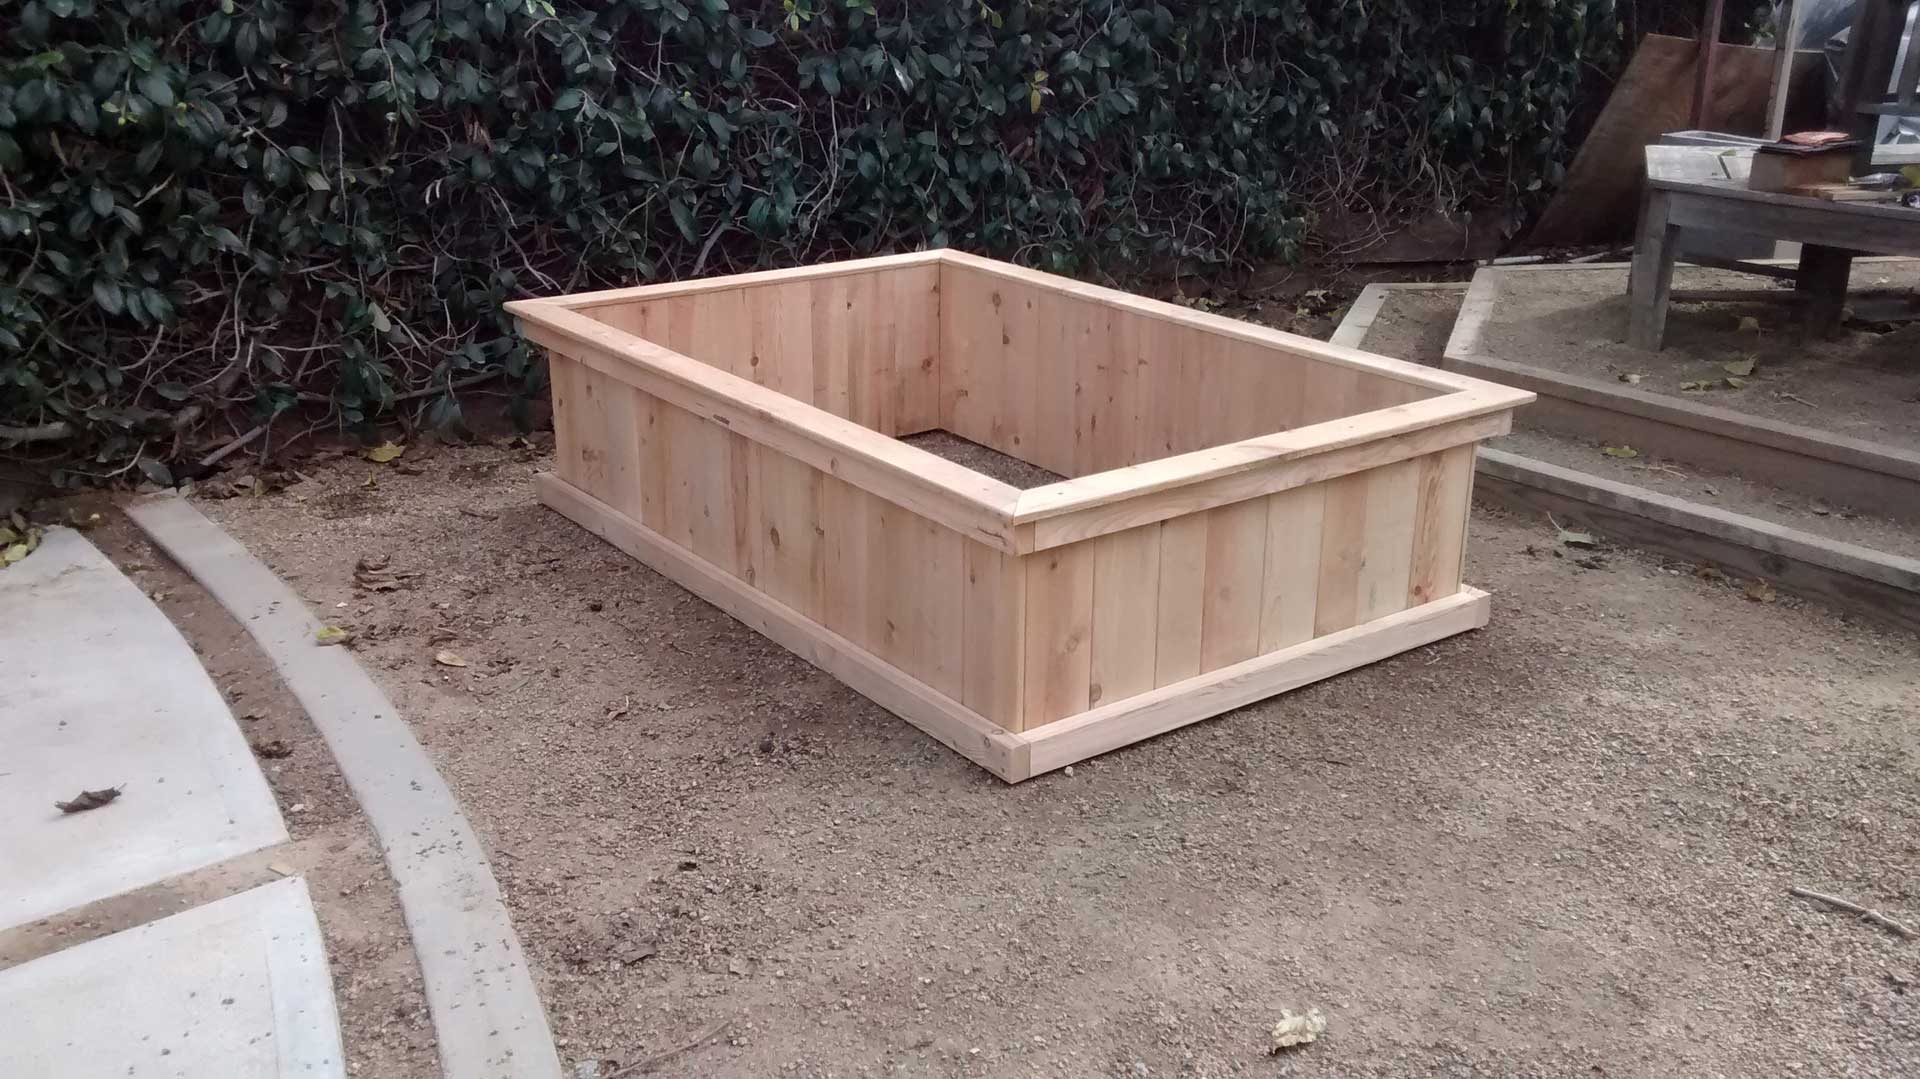 A wooden planter box sitting on the ground.